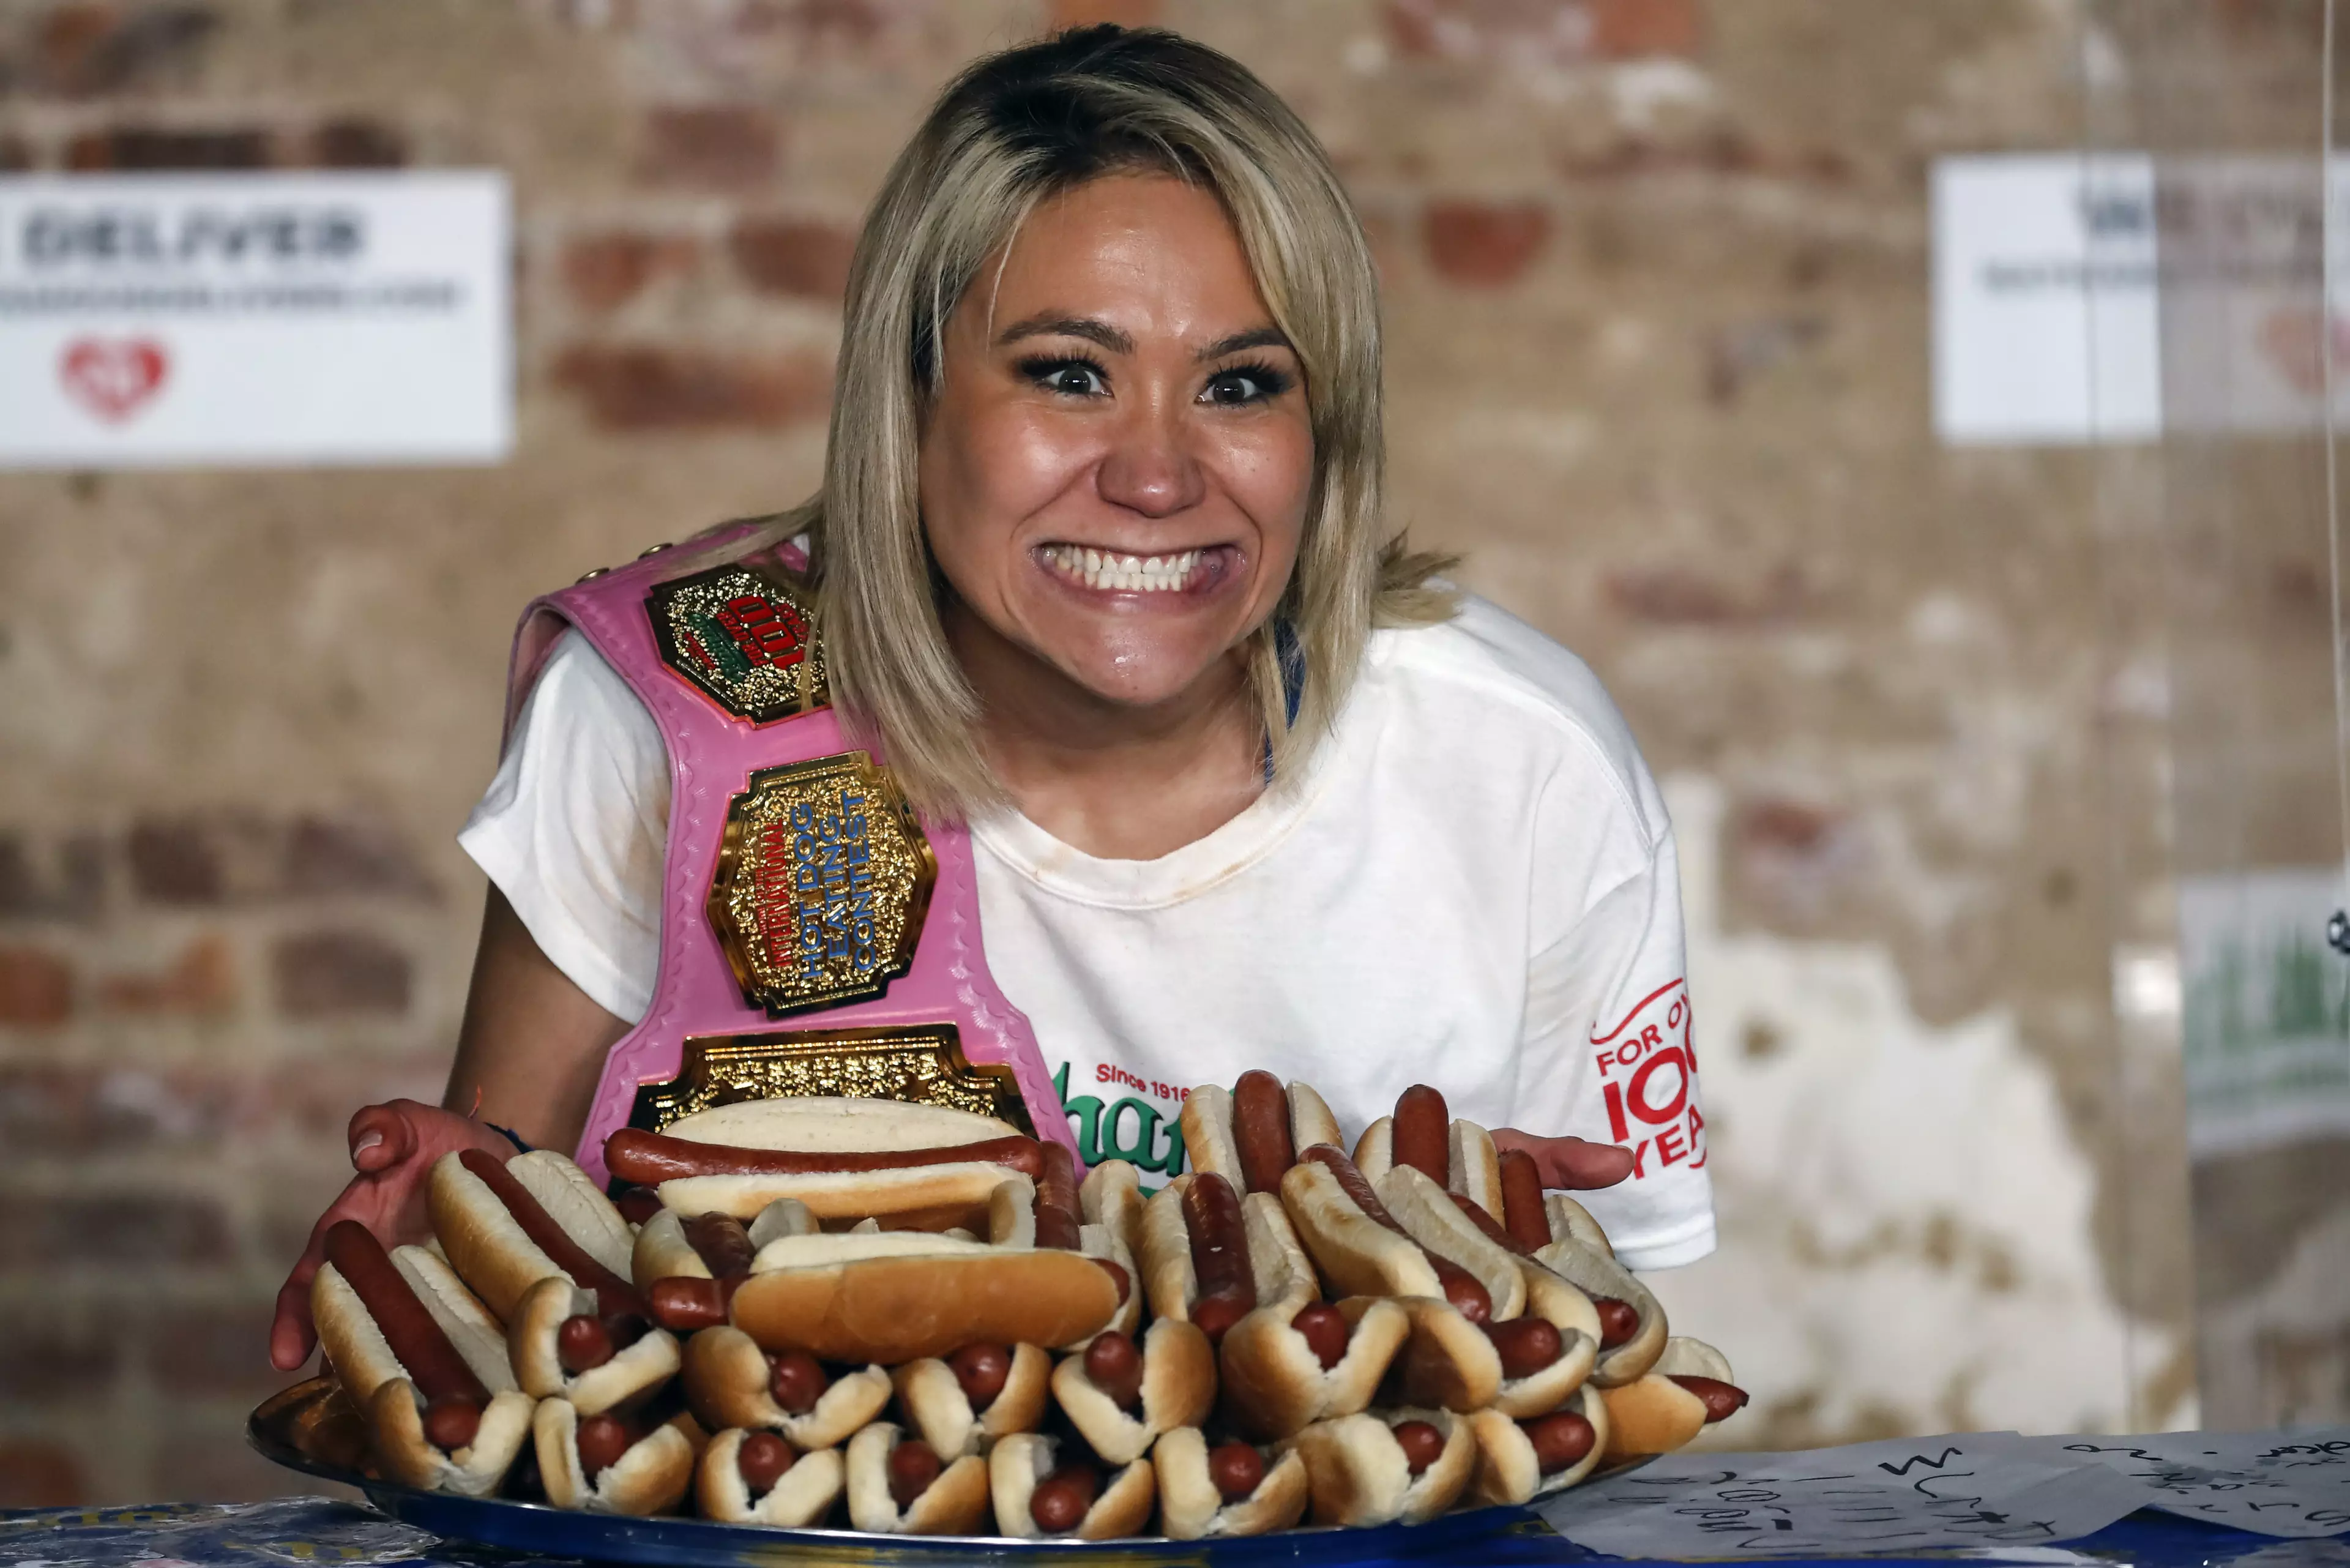 Miki Sudo won the women's title, consuming 48.5 hot dogs in 10 minutes.